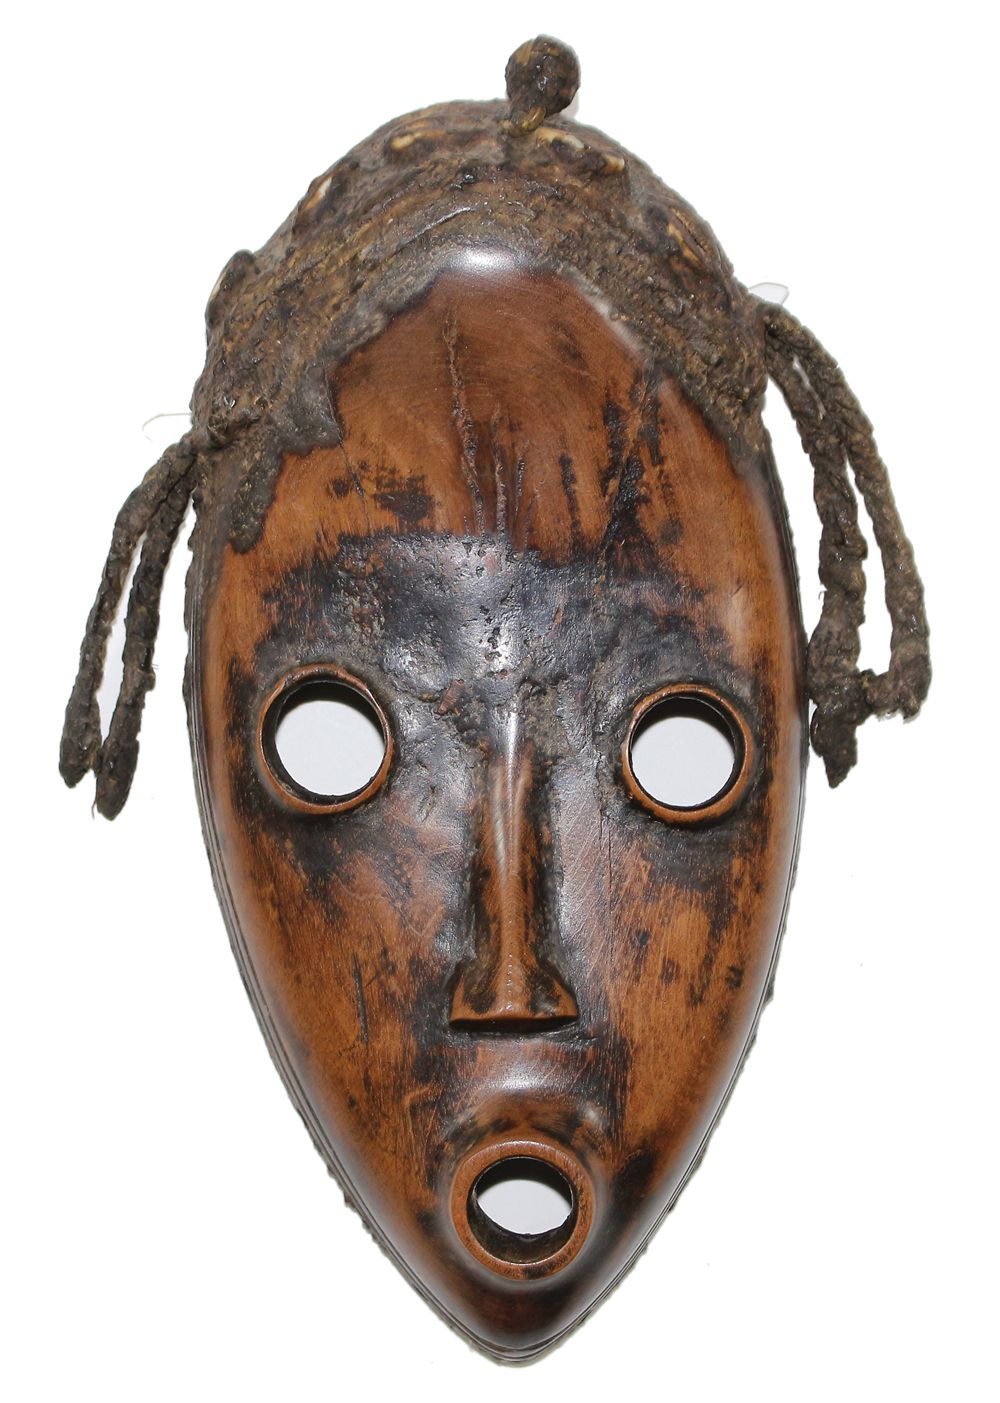 Maske Dan Liberia Ovoid mask with brown shiny patina. Circular eyes and mouth. H&hellip;